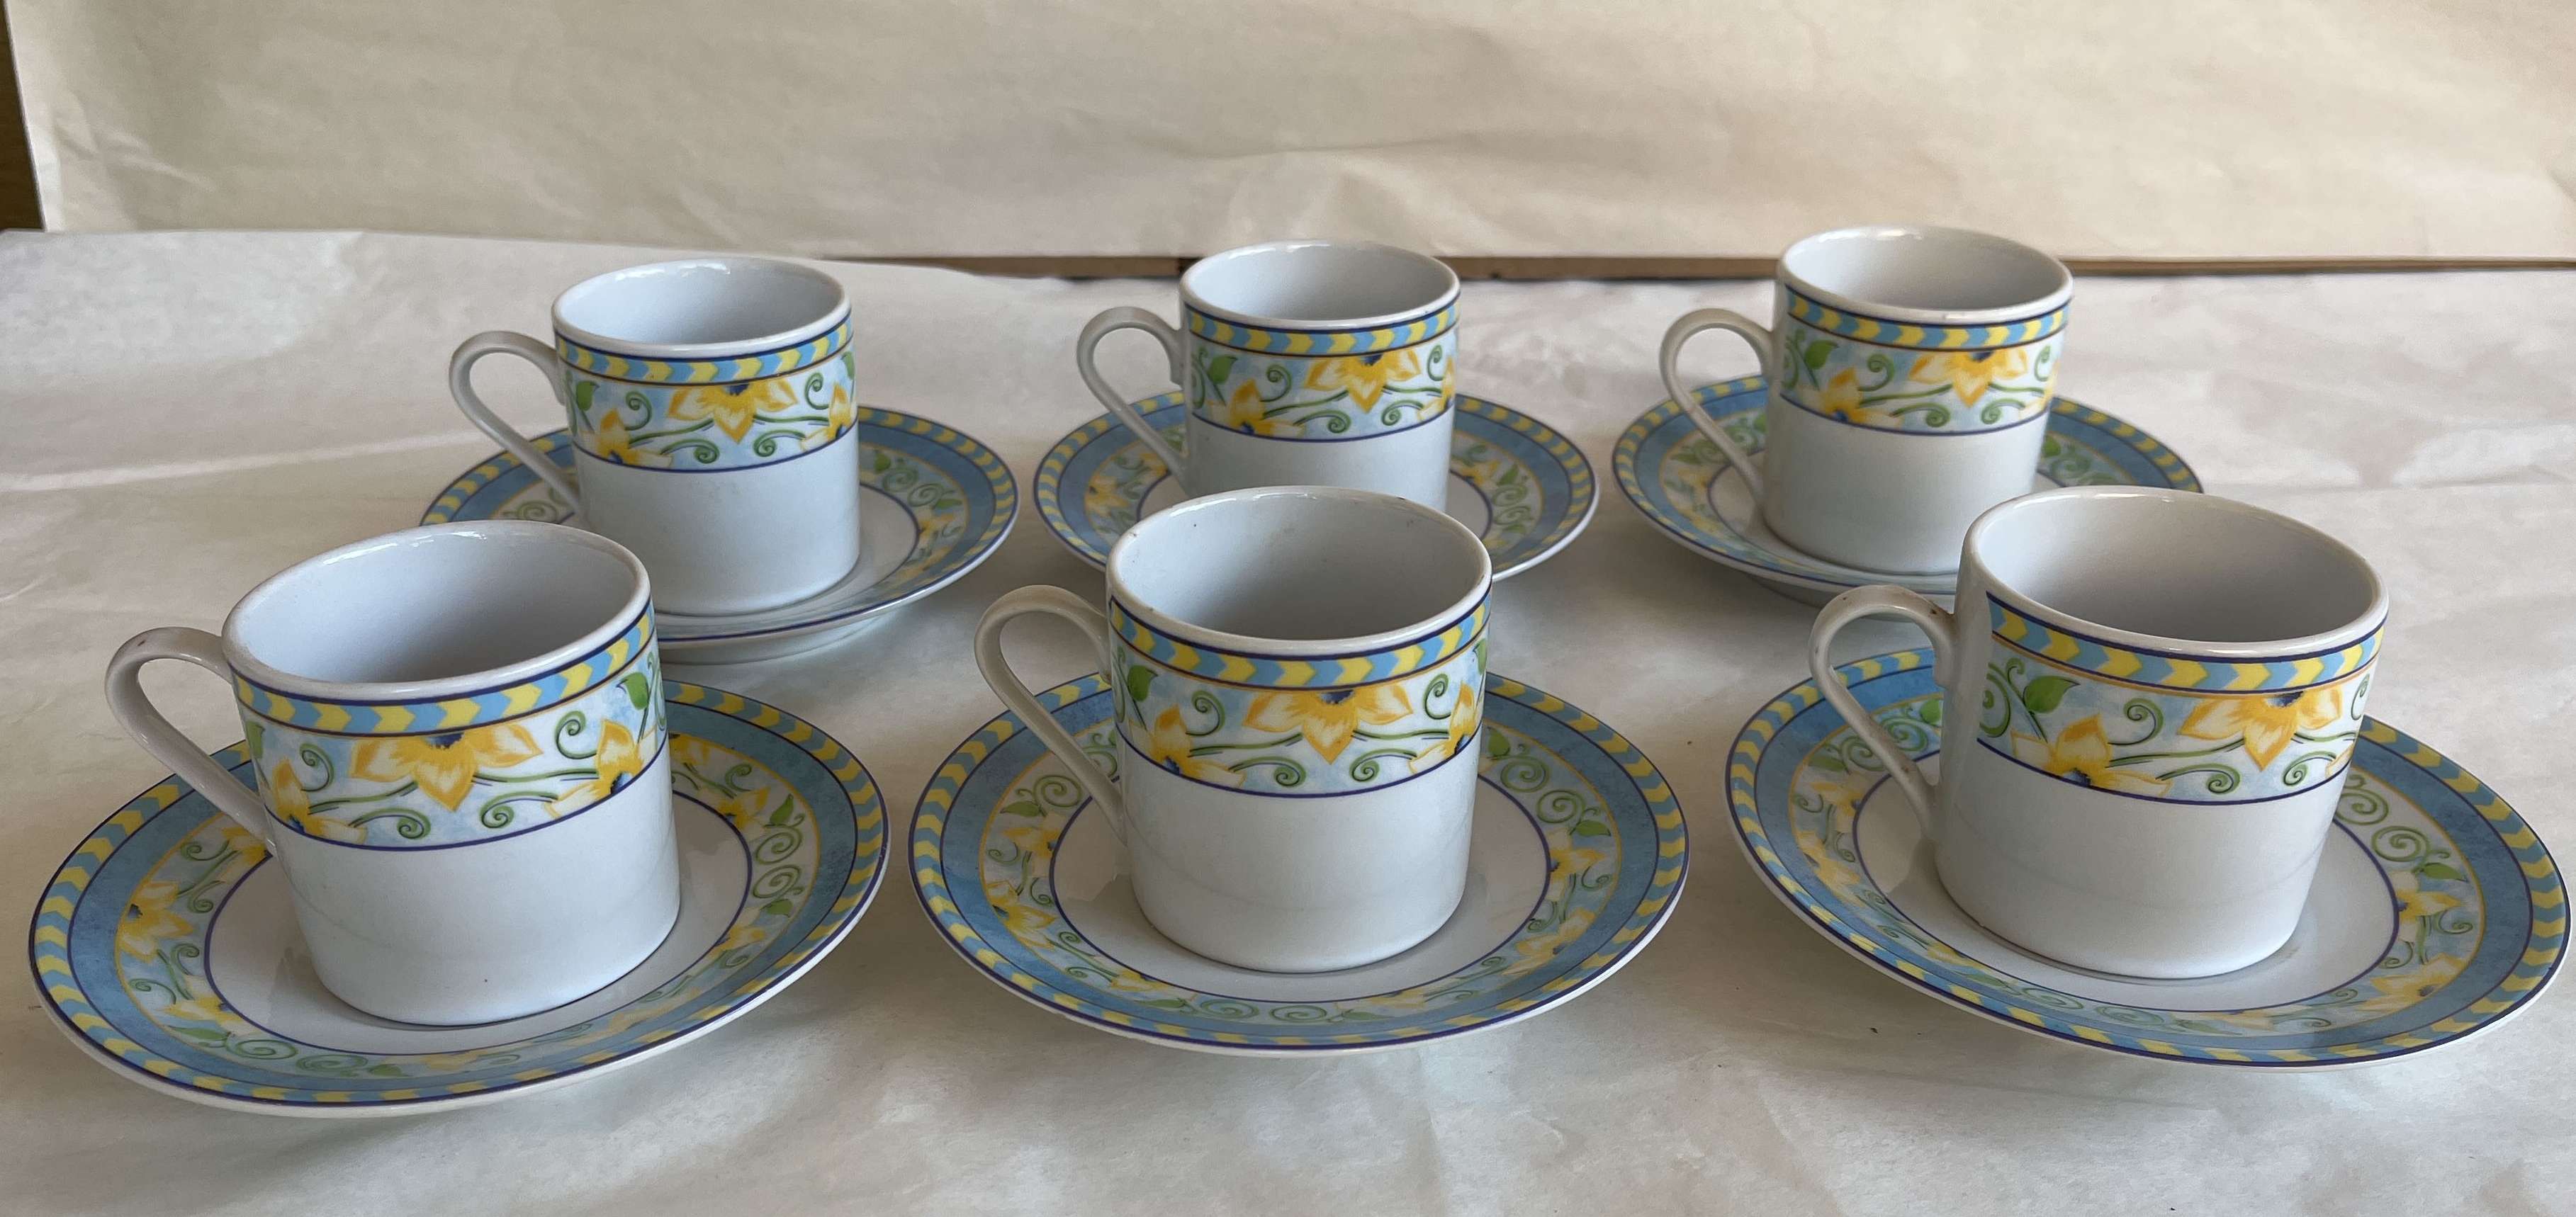 Vintage Porcelain Coffee Set of 6 Cups and Saucers With Flower 